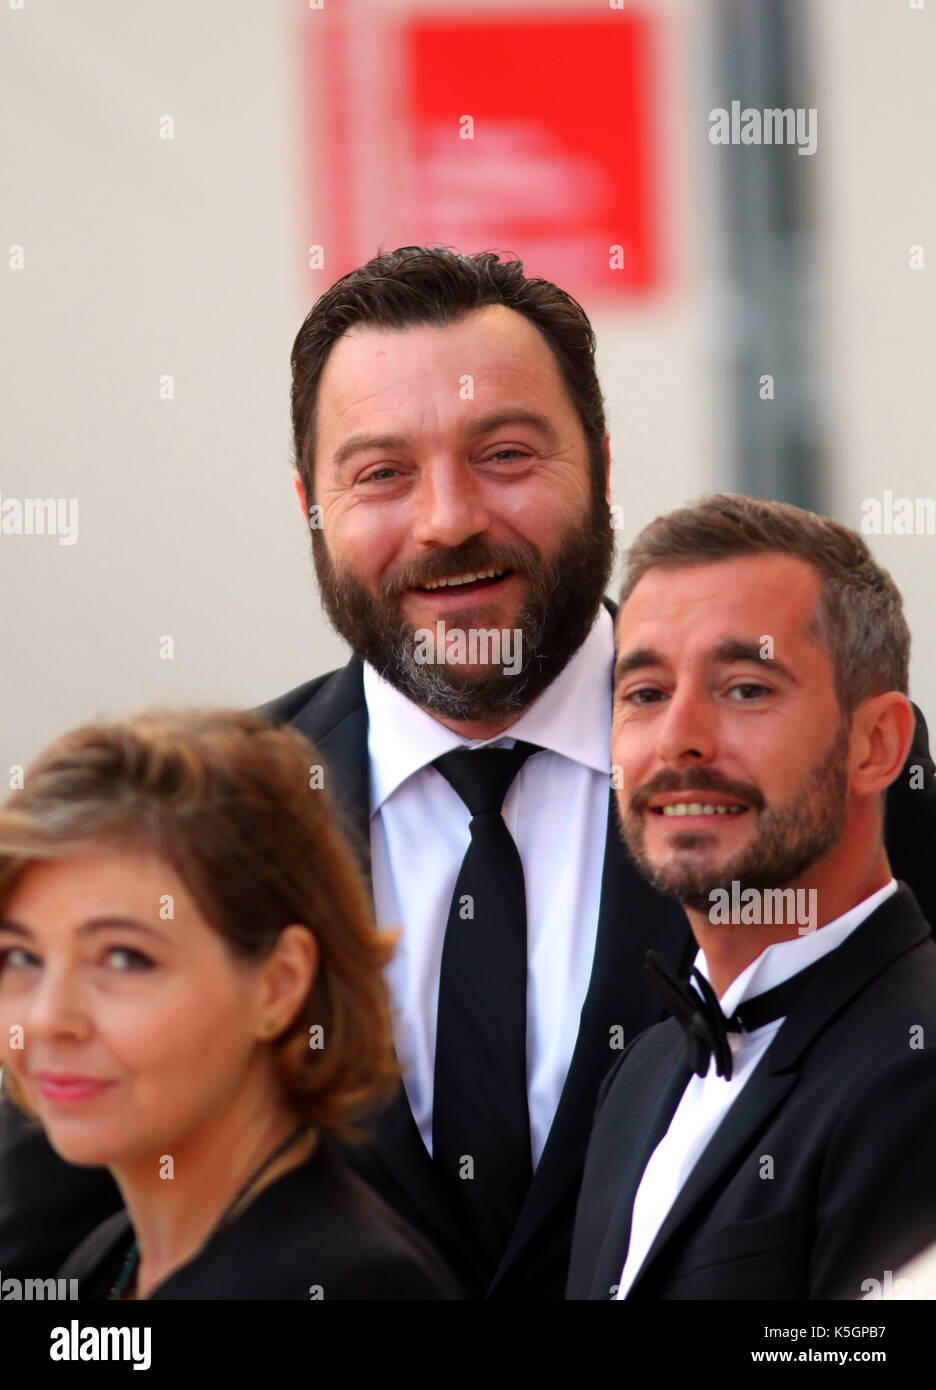 Venice, Italy. 9th September, 2017. Denis Menochet (C) with Xavier Legrand (R) attends at the Award Ceremony during the 74th Venice International Film Festival at Lido of Venice on 9th September, 2017. Credit: Andrea Spinelli/Alamy Live News Stock Photo